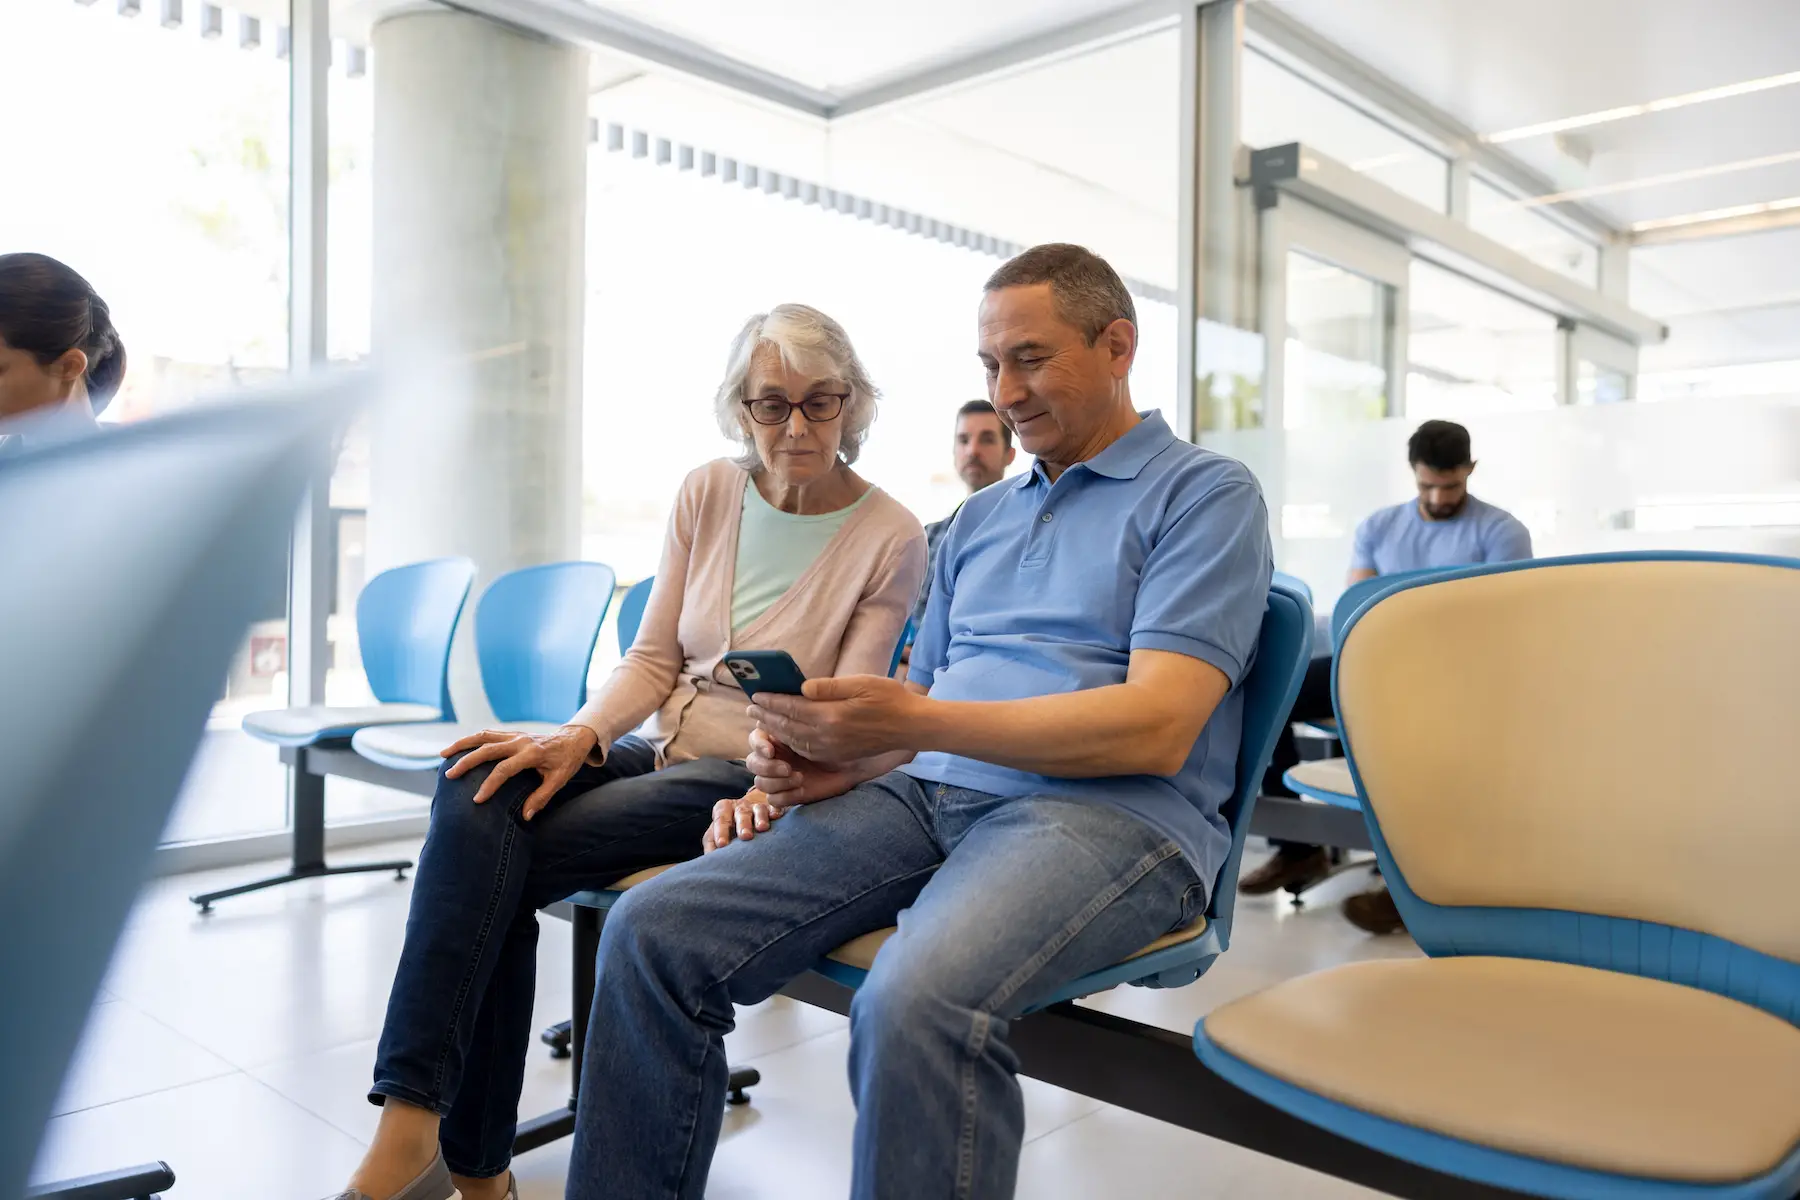 An older couple sits together in the waiting room at the hospital while looking at something on his mobile phone